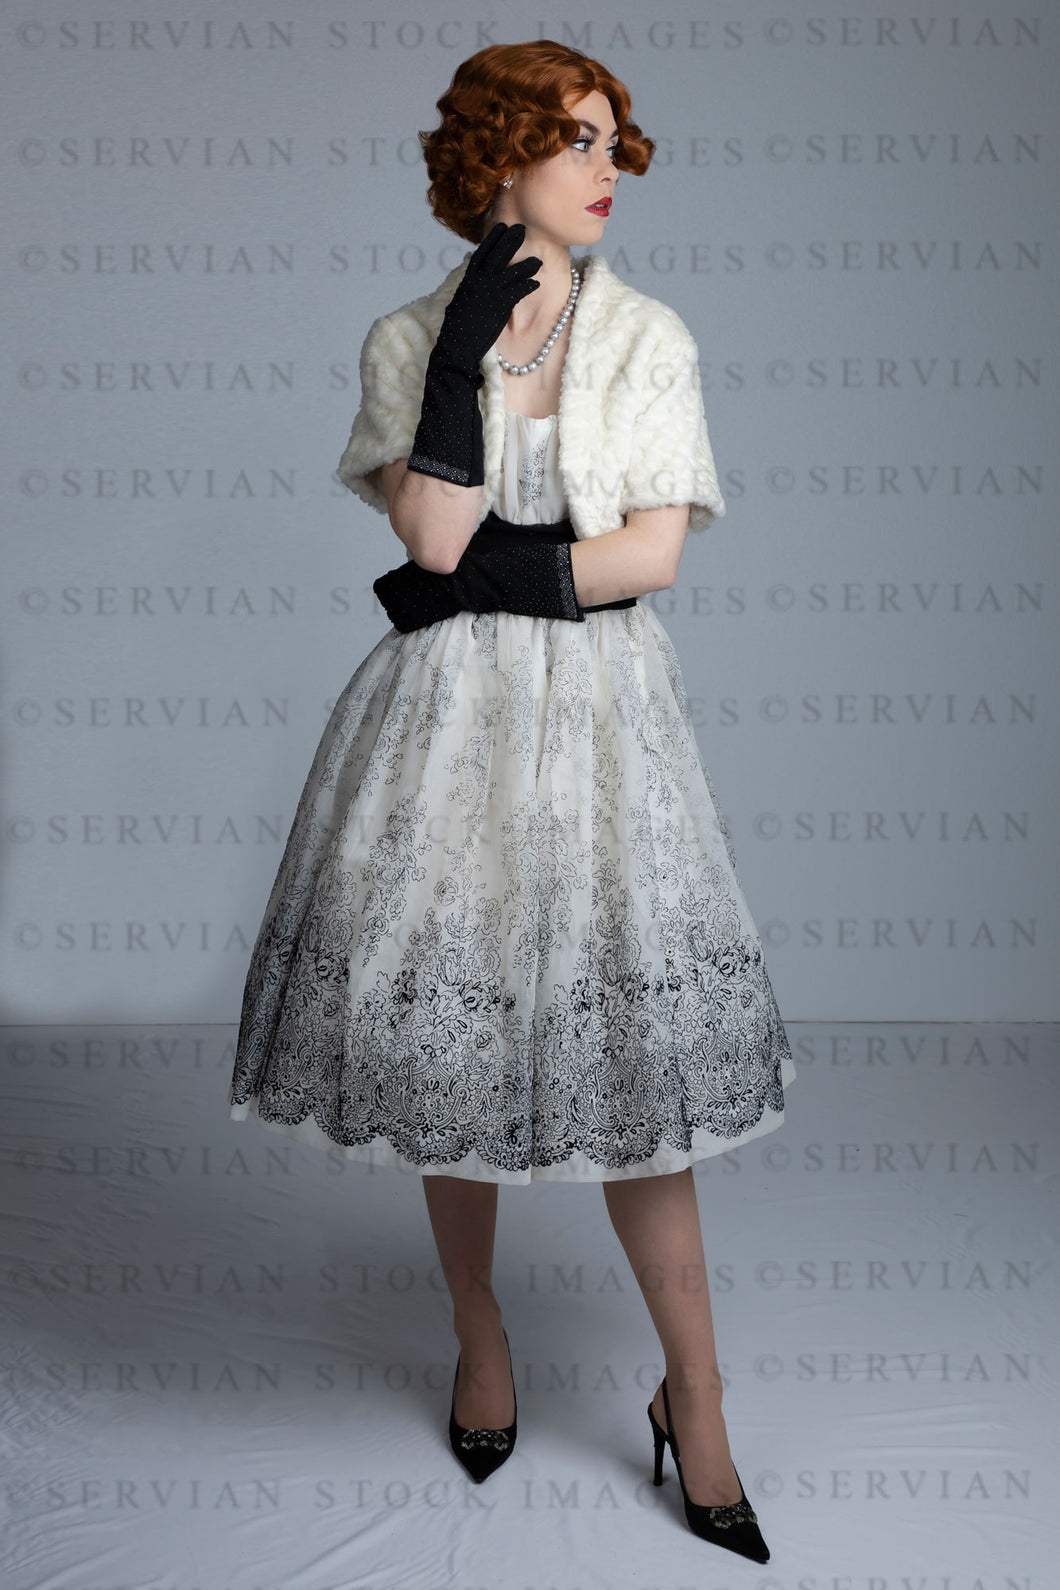 1950s woman in vintage dress, white fur shrug, and black gloves (Lacey 2517)